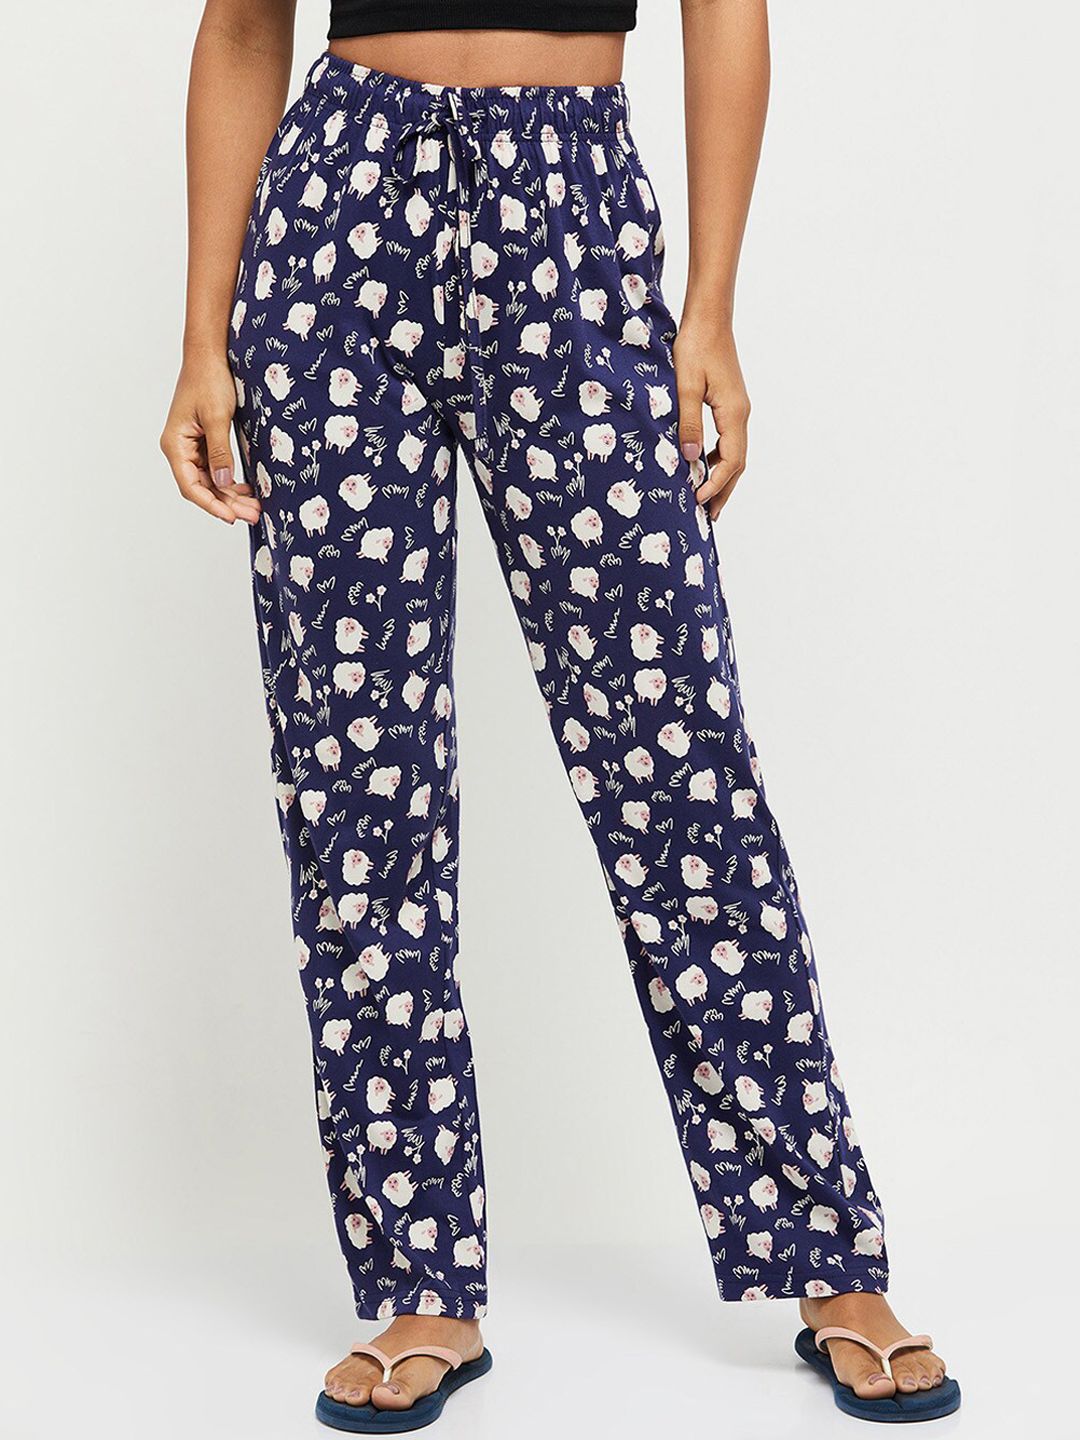 max Women Navy Blue & White Printed Cotton Lounge Pants Price in India